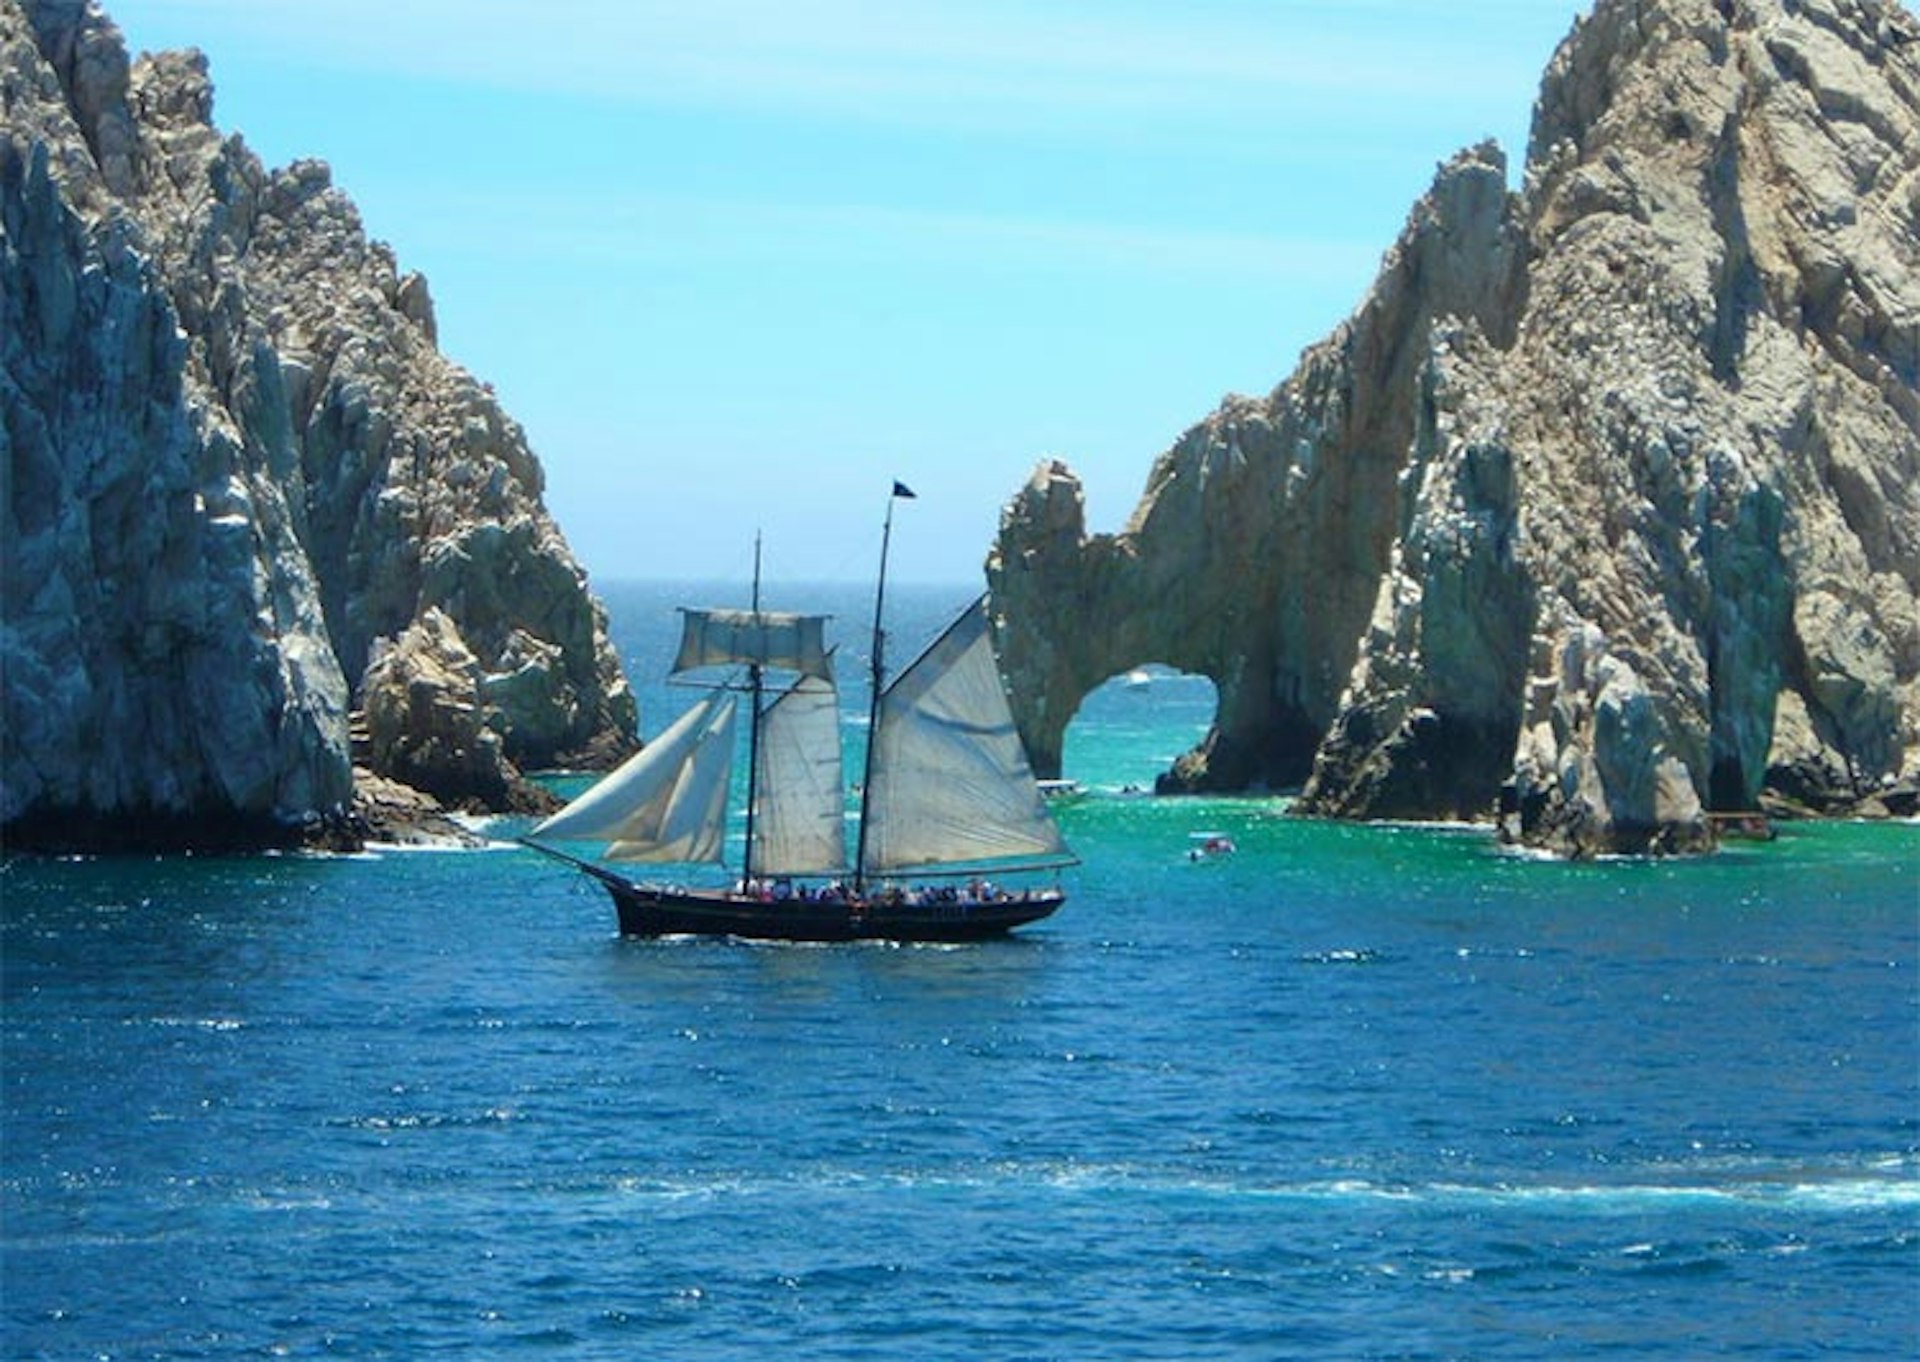 Open water, rocky outcrops and not a Jolly Roger in sight: navigate the Caribbean aboard an old sailing ship. Image by Lisa Andres / CC BY 2.0